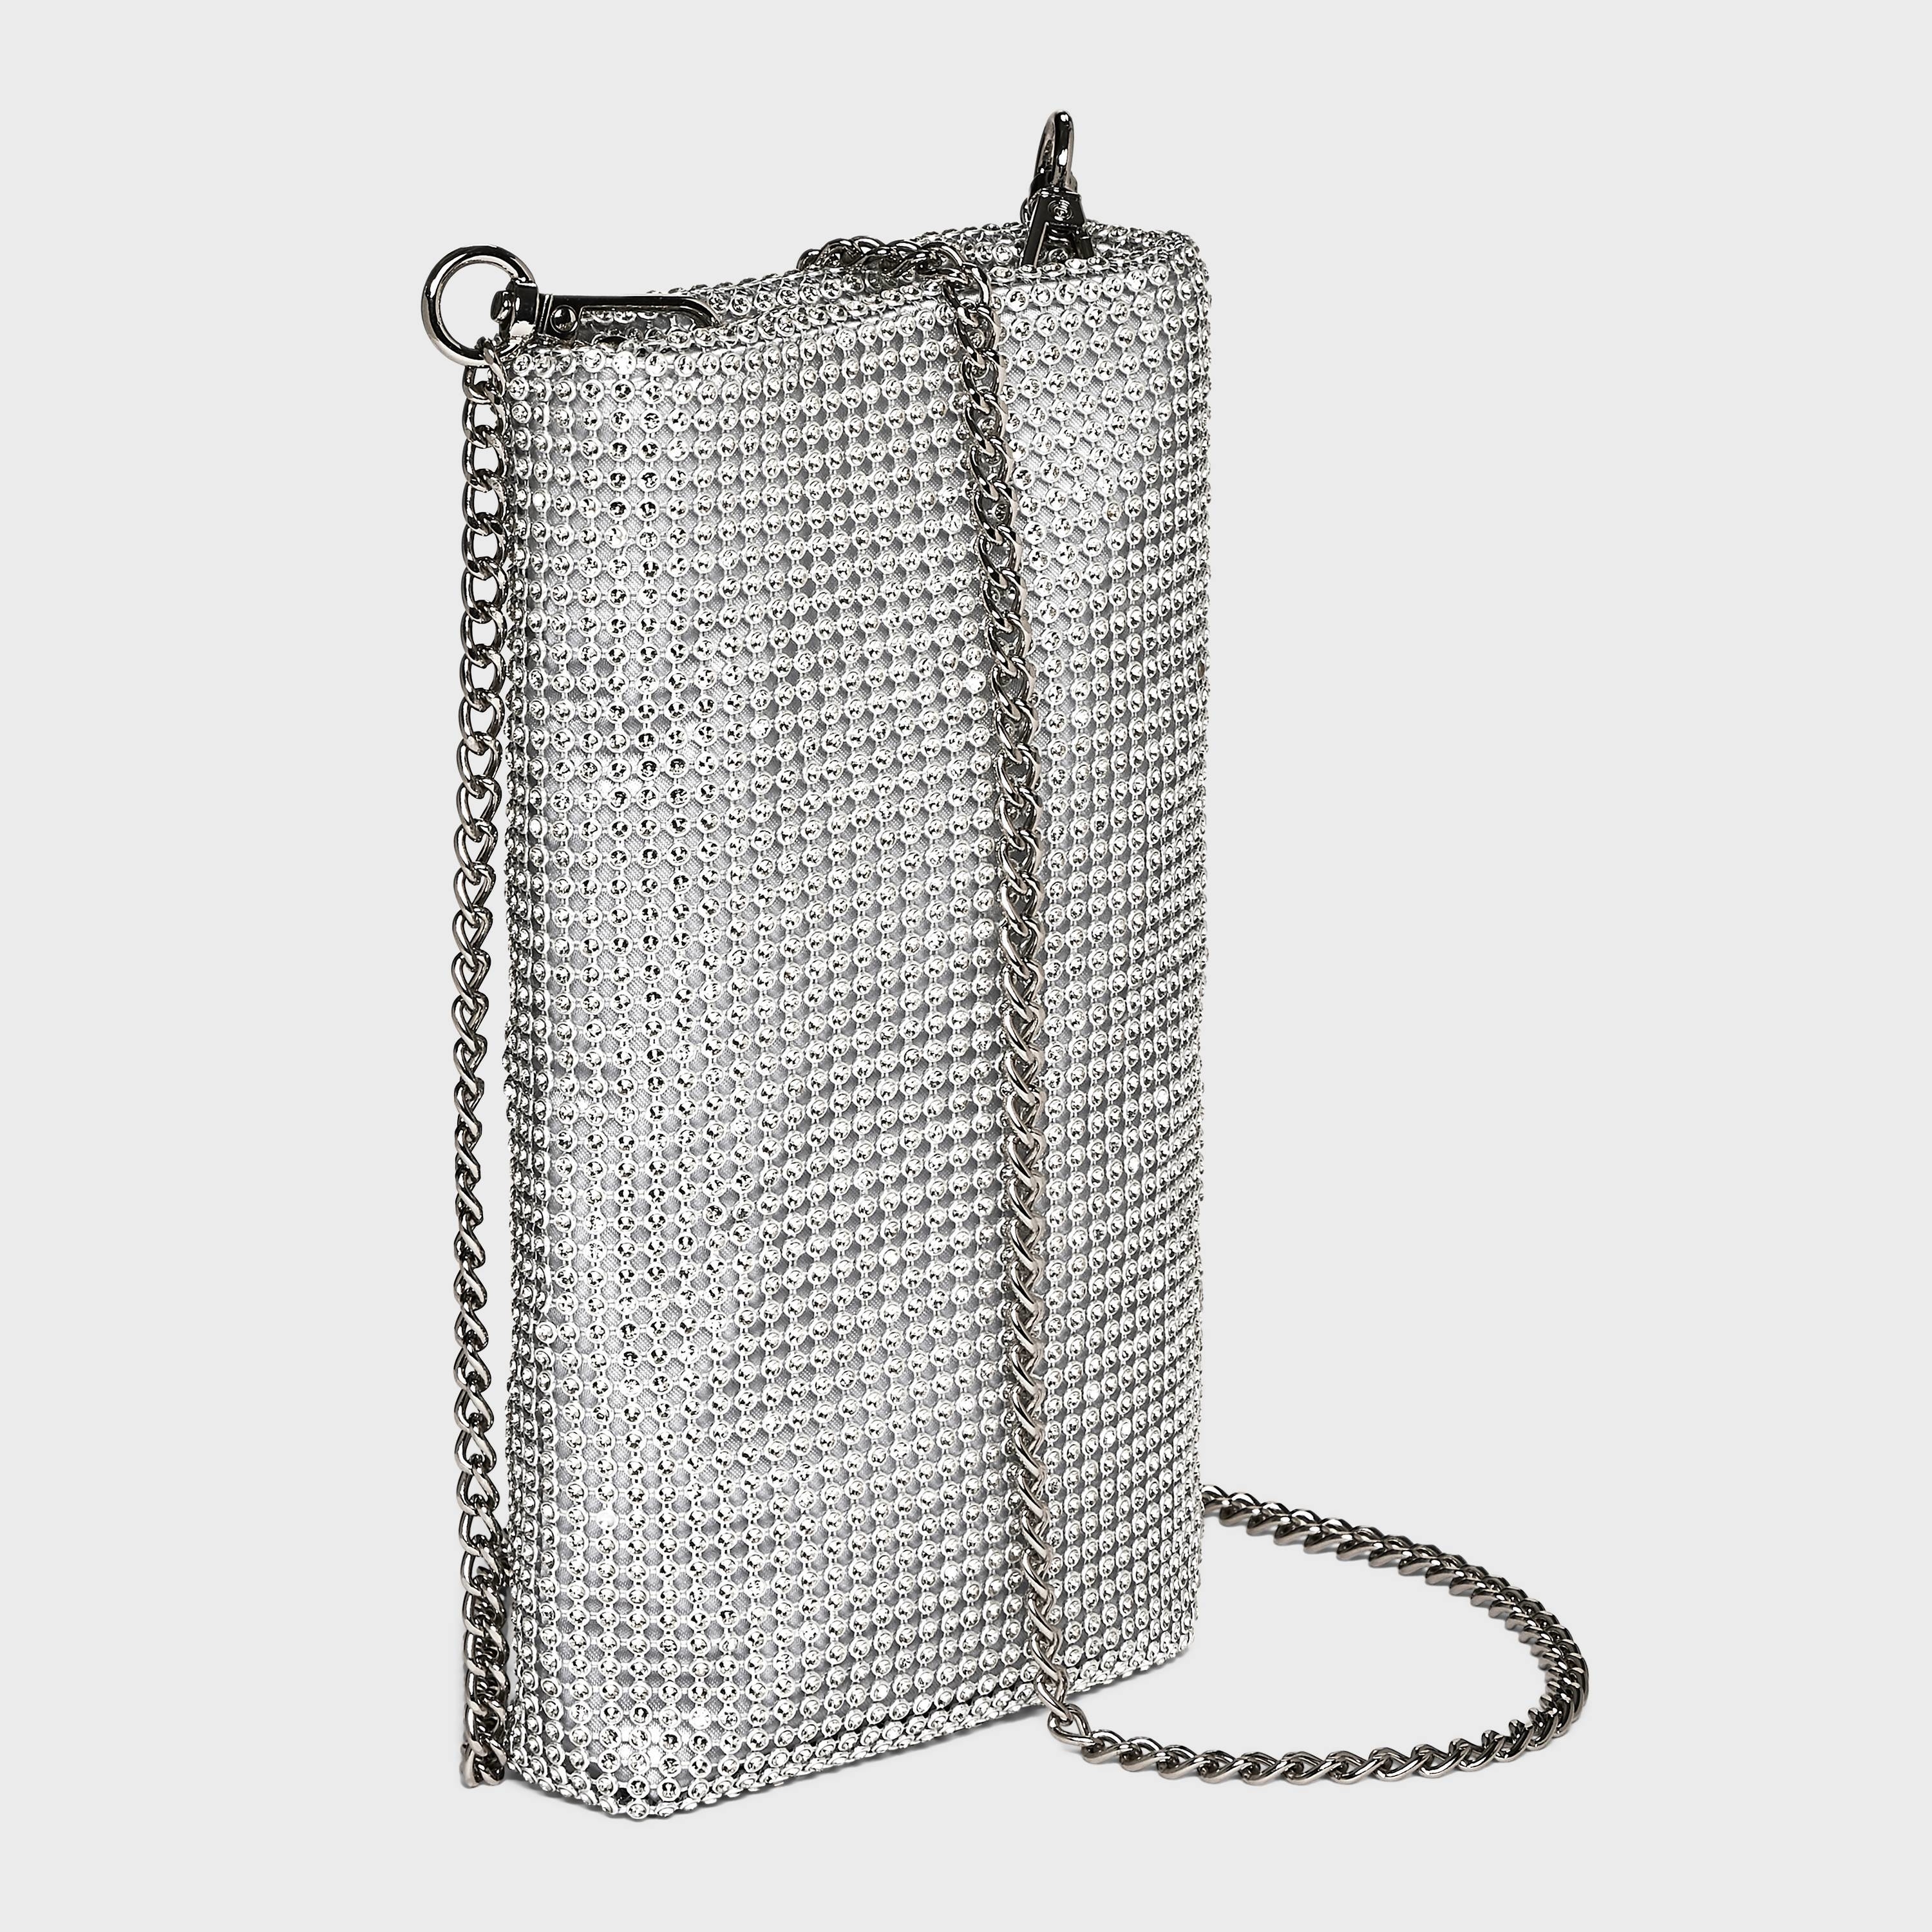 A sparkly phone-sized bag